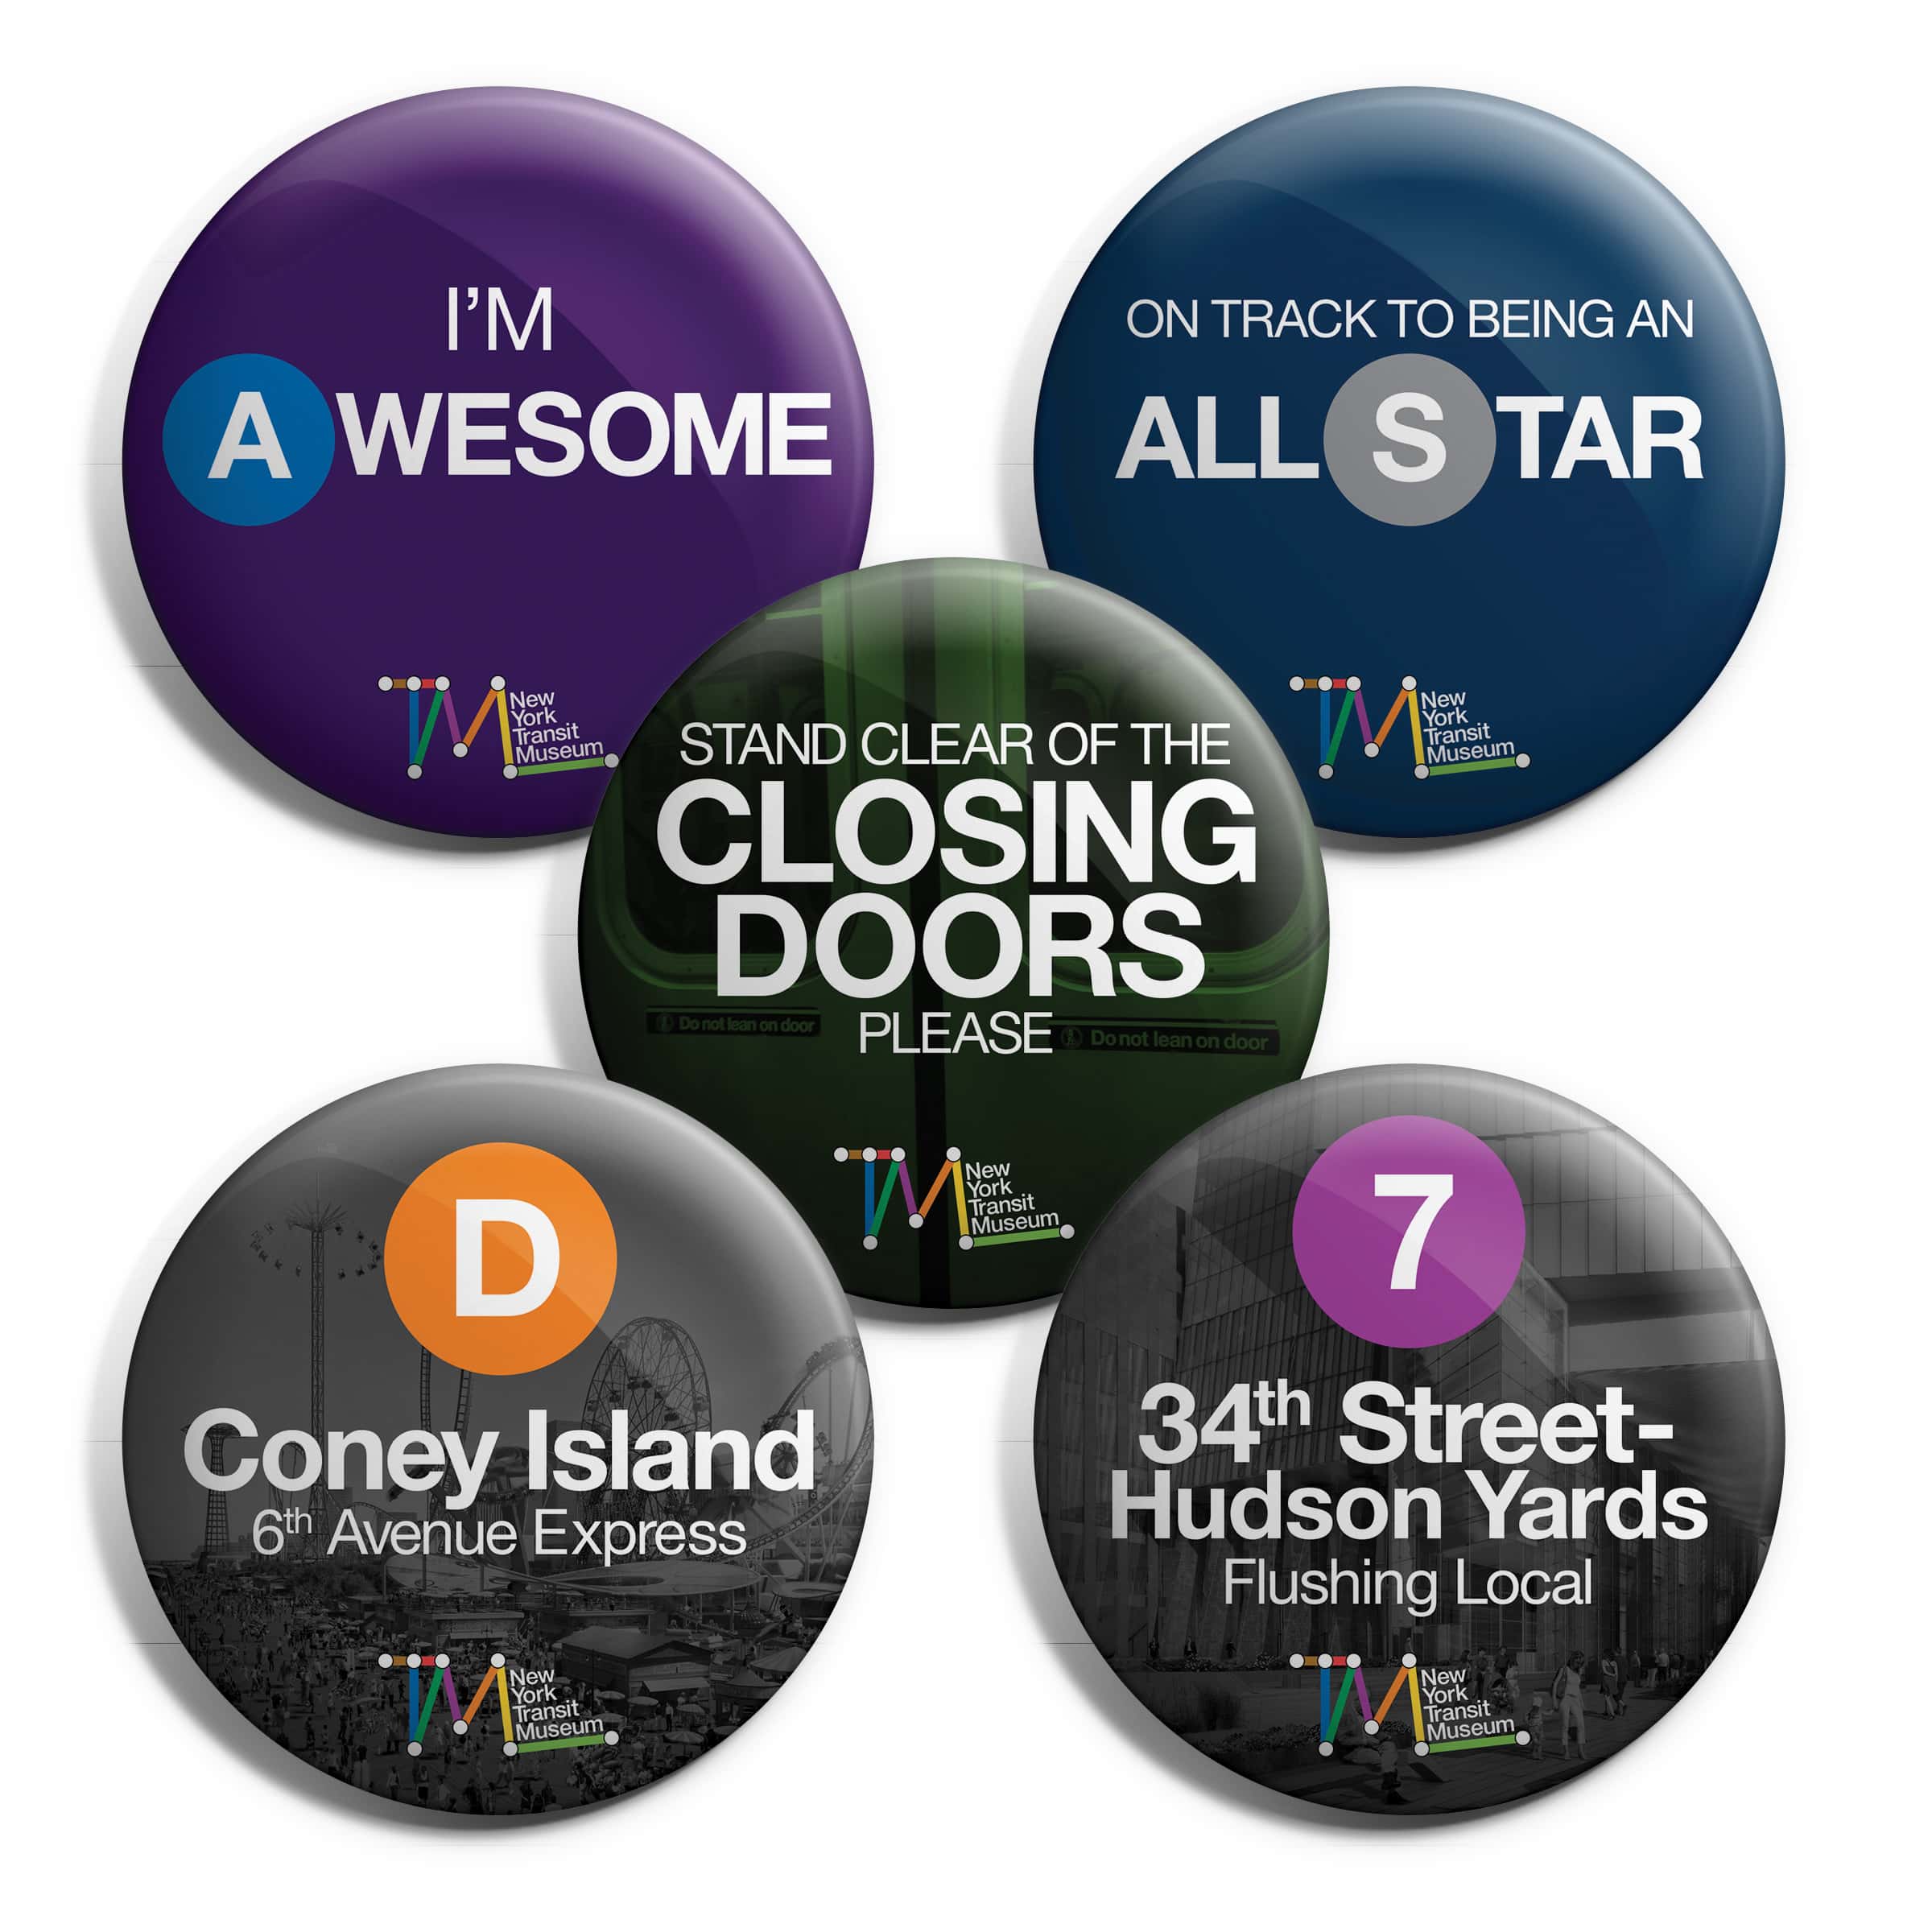 Mockup of five chest pin buttons. One purple button says, I'm Awesome, a dark blue button says, On track to being an all star, a dark green button says, Stand clear of the closing doors please, a gray button says, D, Coney Island, 6th Avenue Express, and a brown button says 7, 34th Street-Hudson Yards, Flushing Local